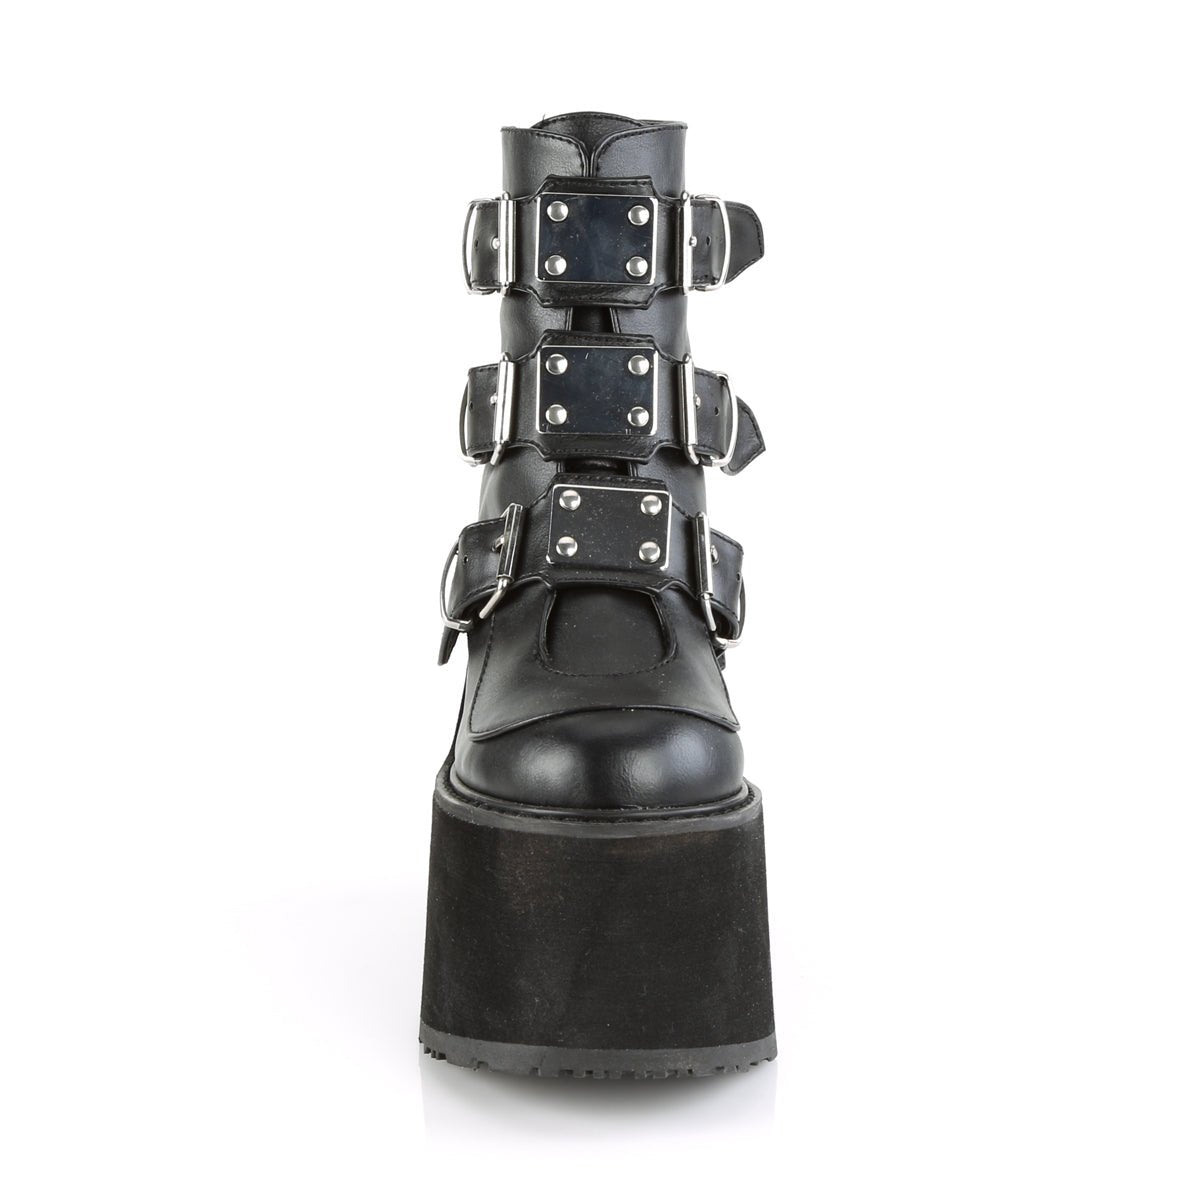 Too Fast | Demonia Swing 105 | Black Vegan Leather Women's Ankle Boots